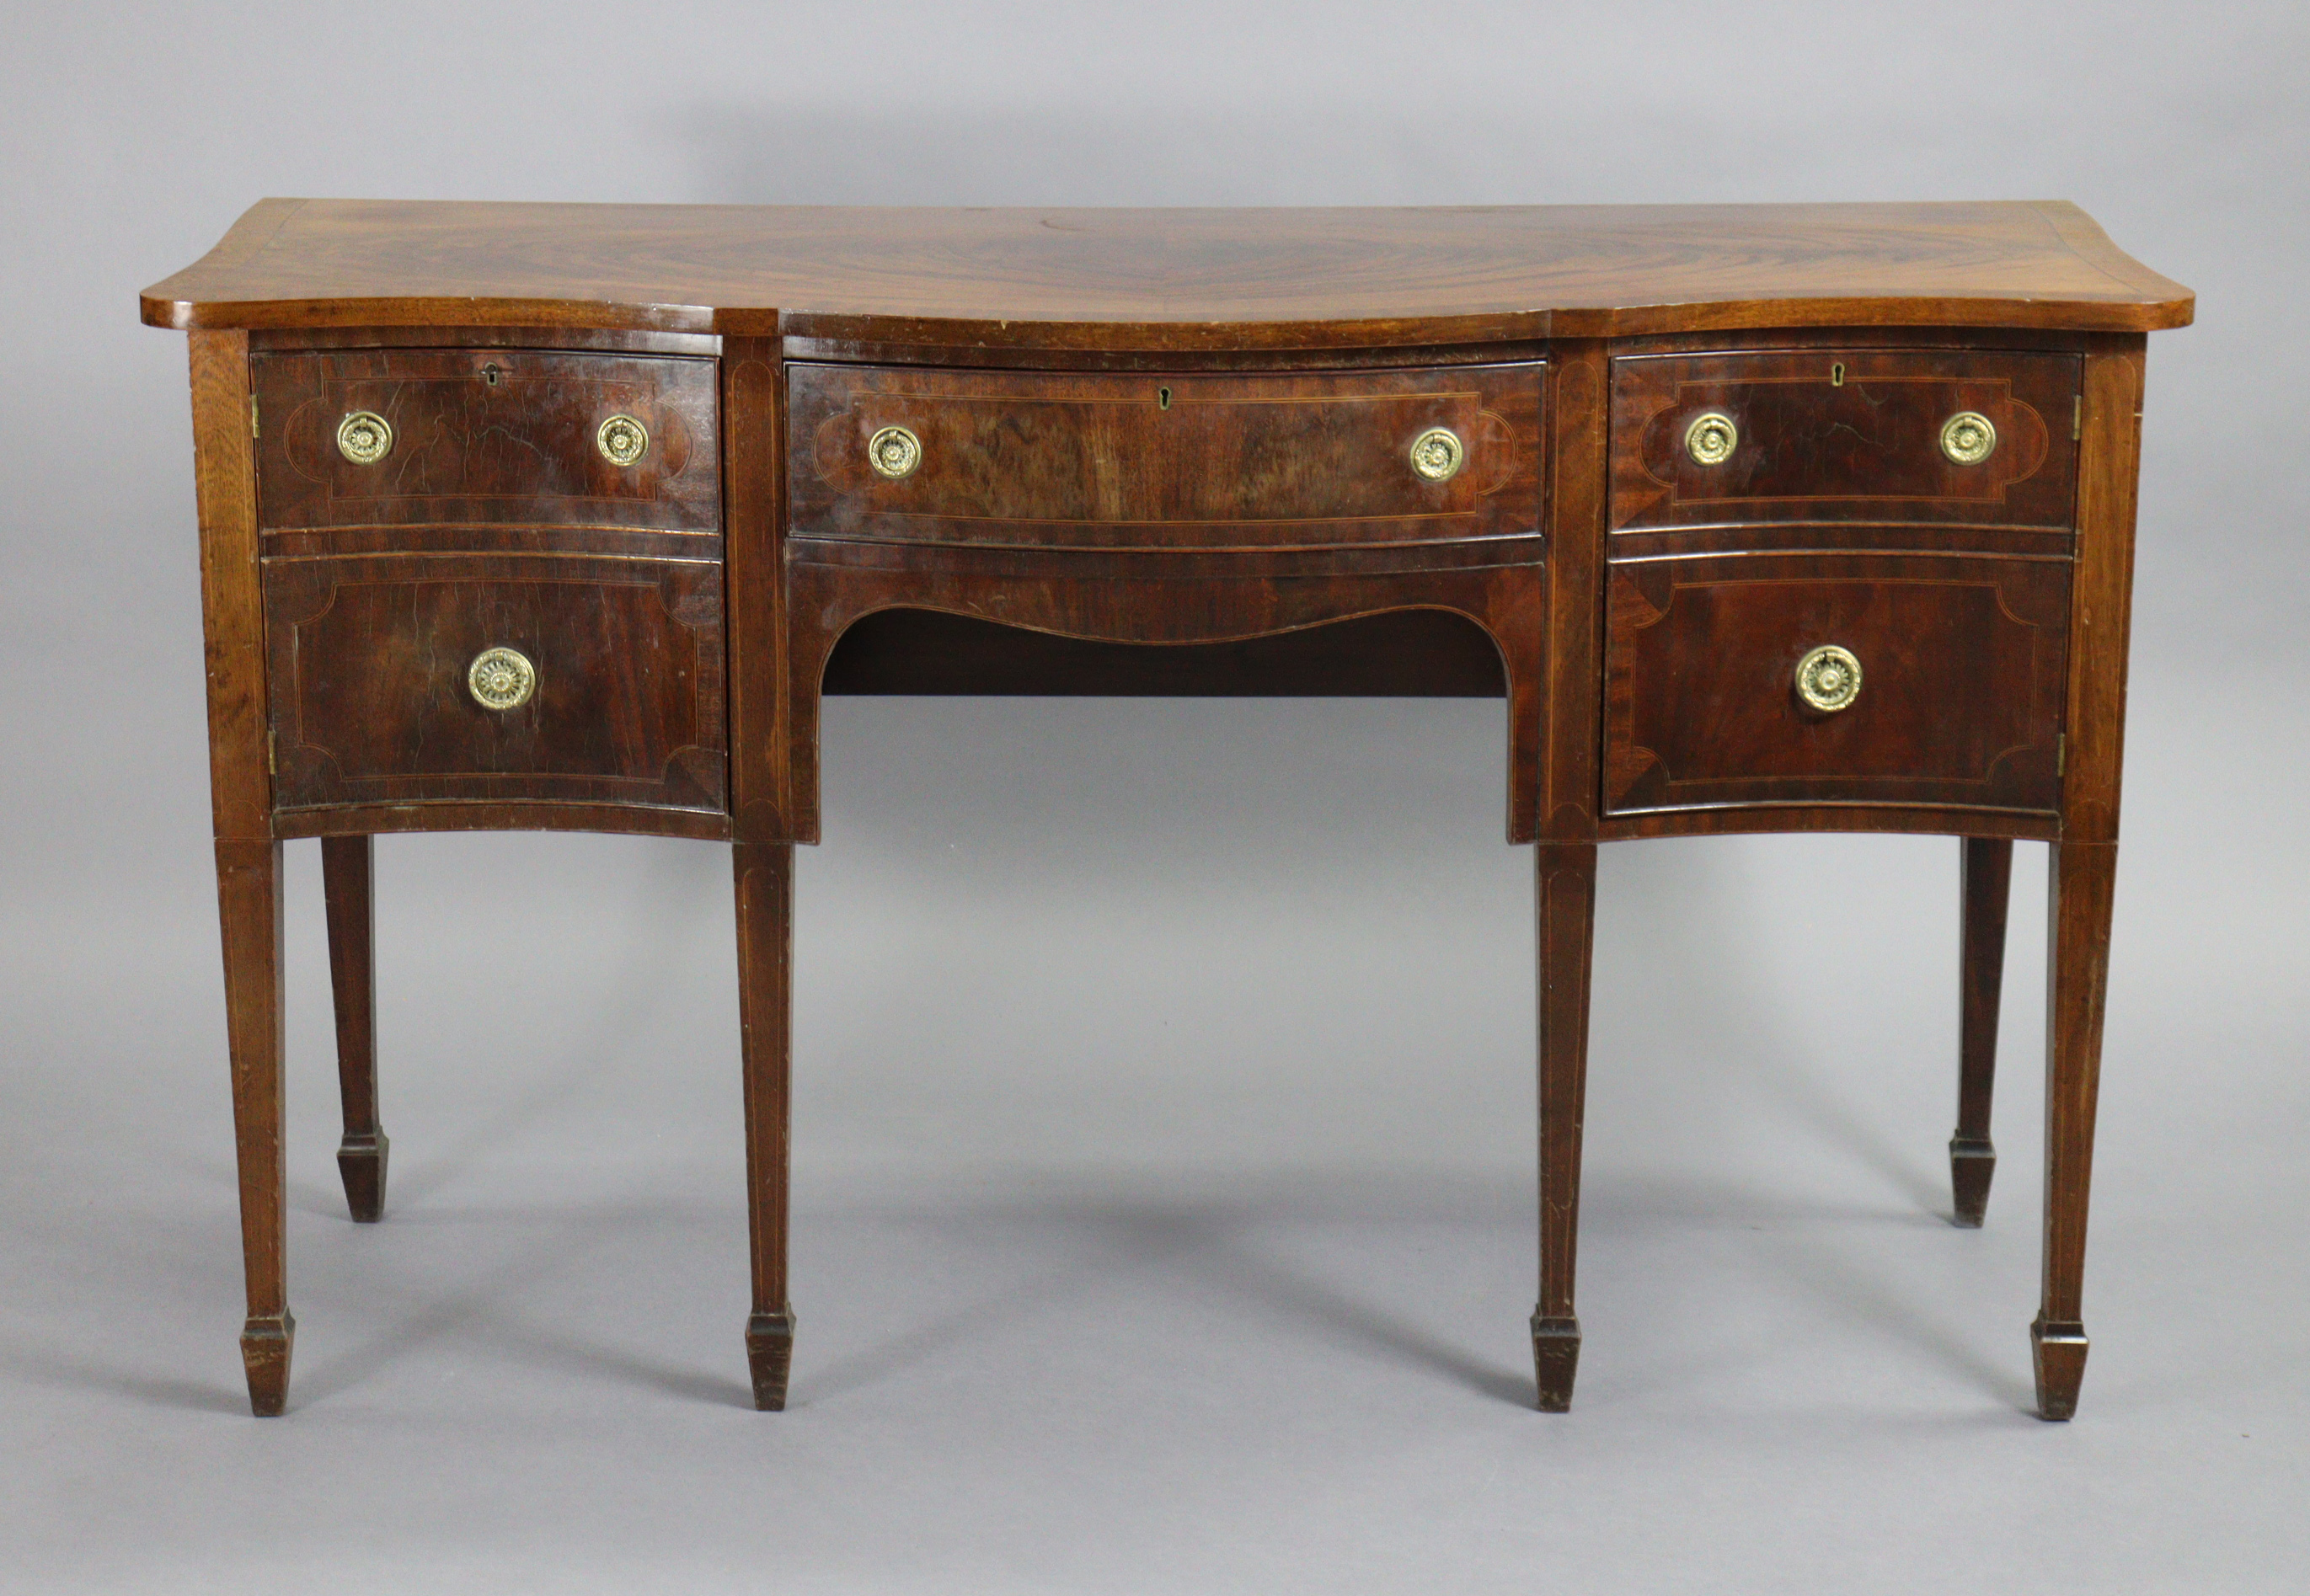 A regency-style serpentine-front mahogany sideboard, with crossbanded rectangular top, fitted single